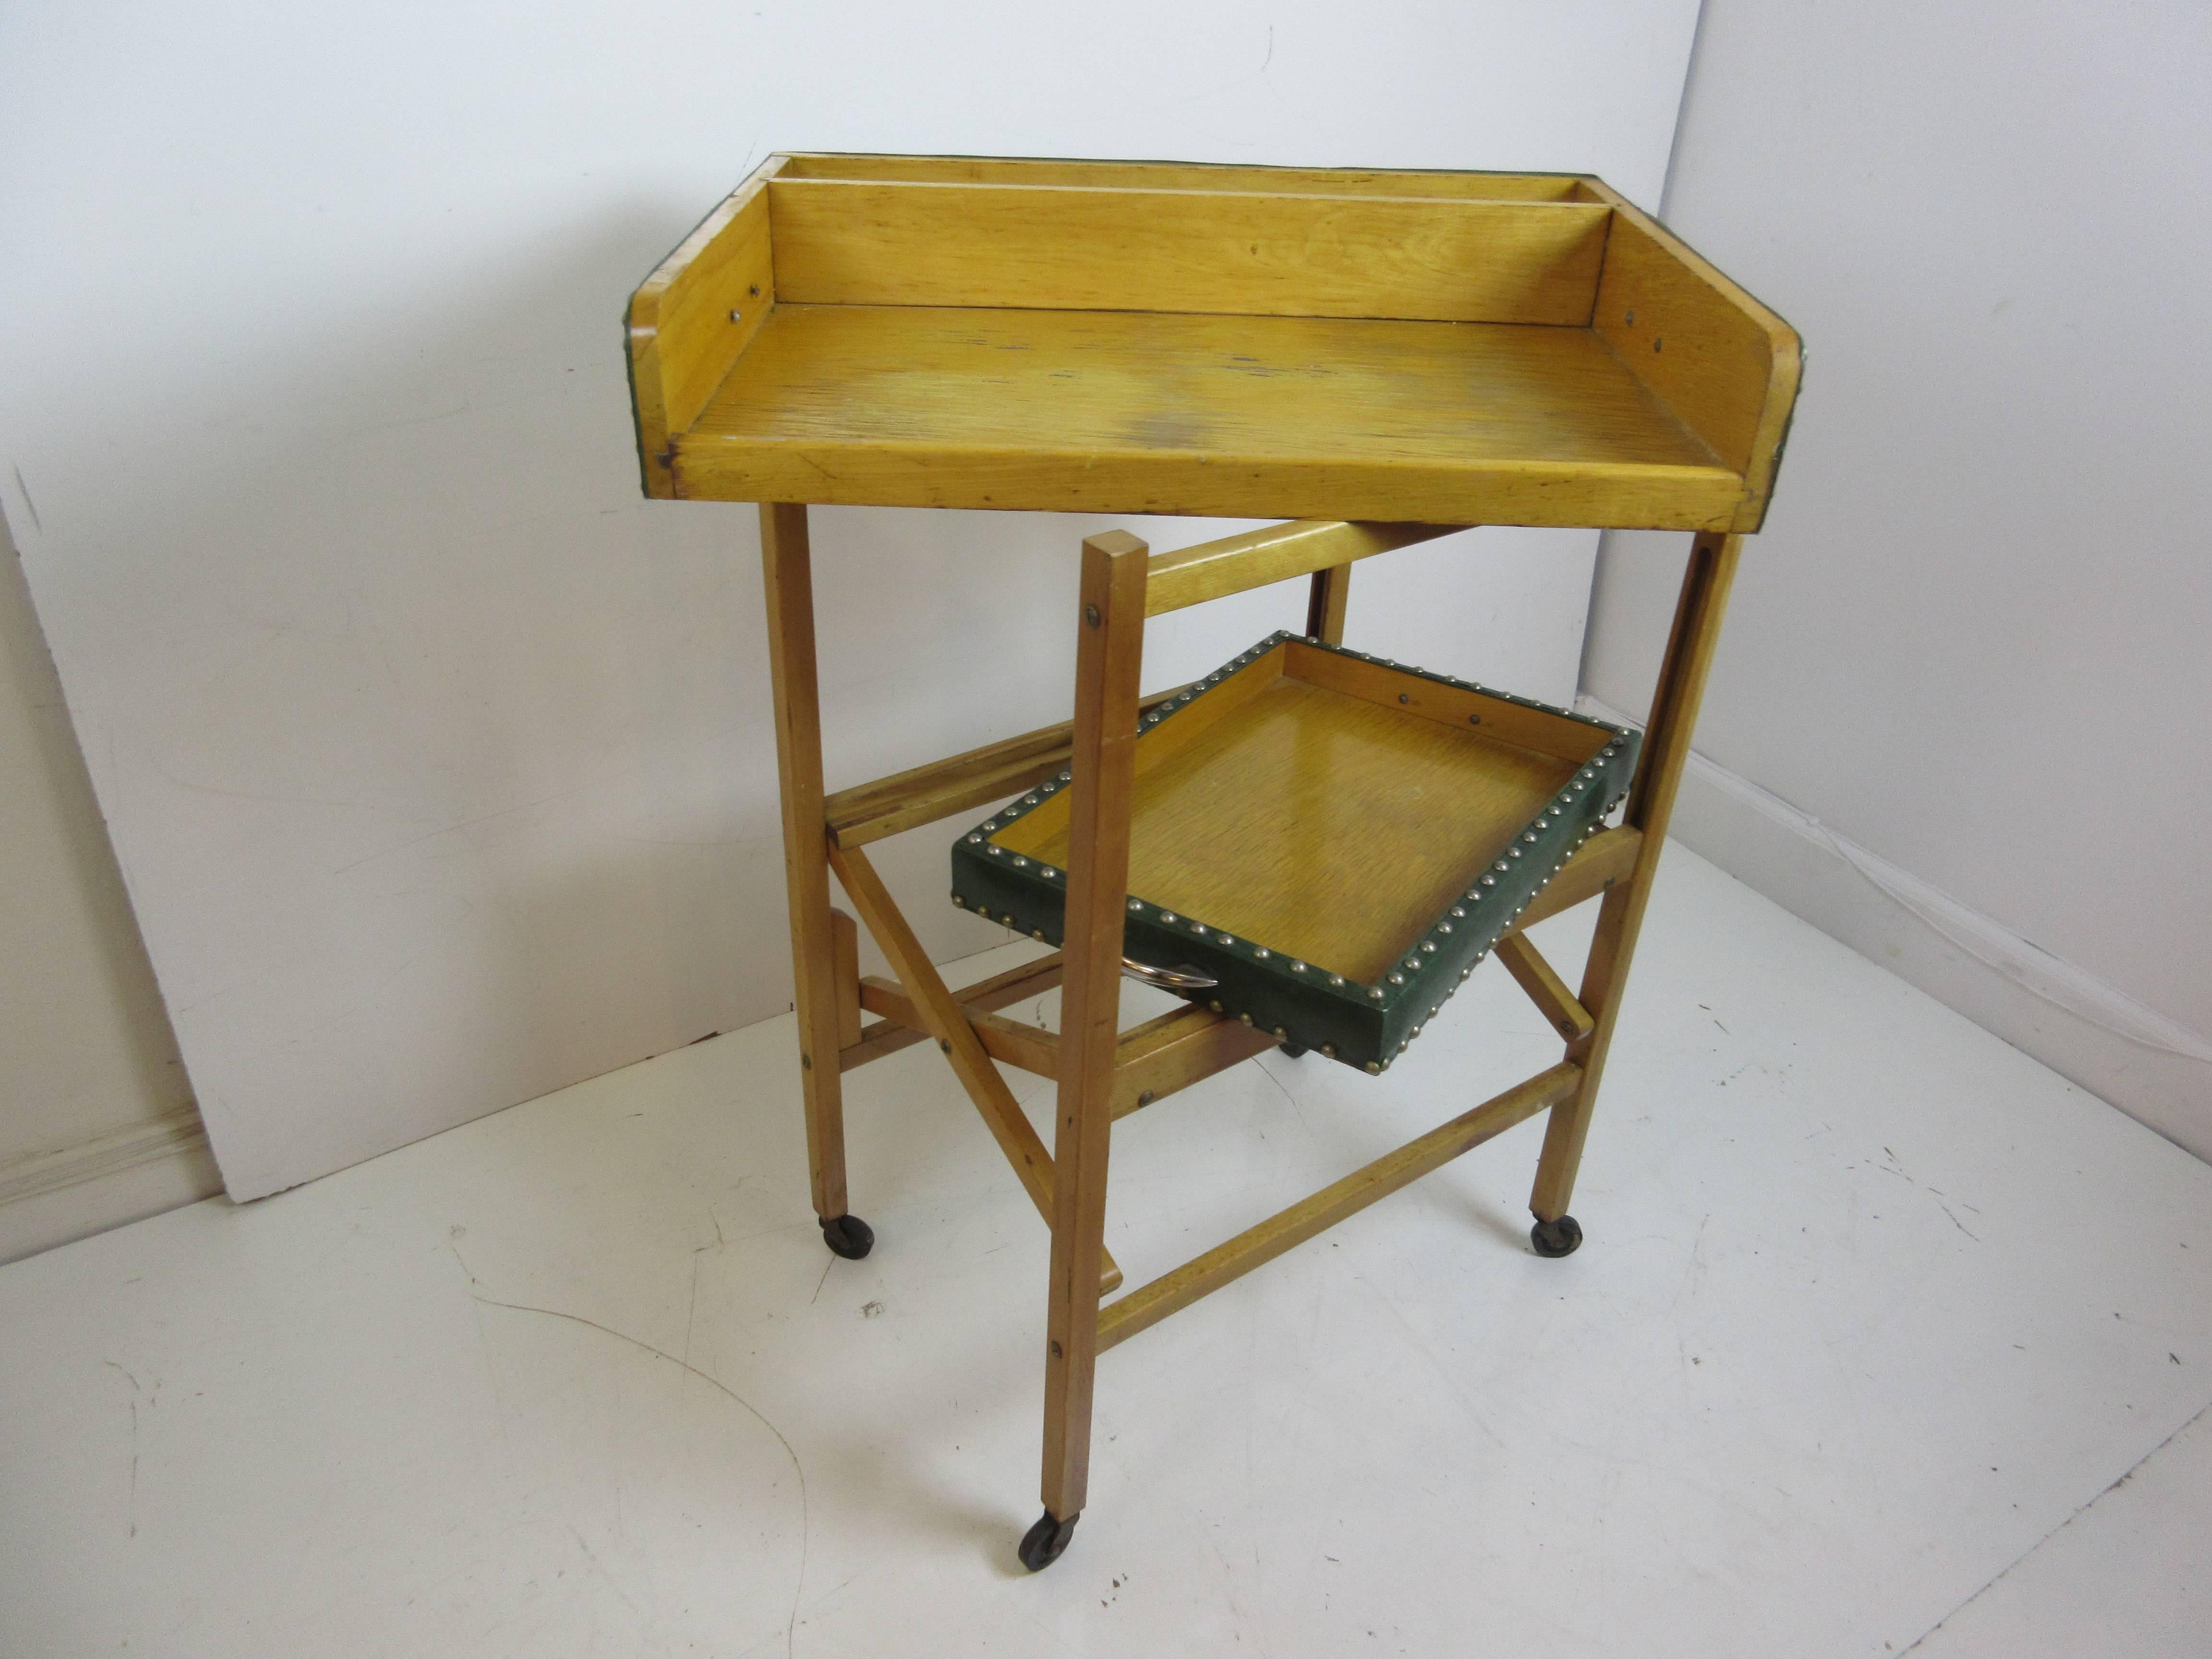 Drink trolley with two removable serving trays and supported by a folding Stand. Trays are covered in a green vinyl with brass hobnail tacks.